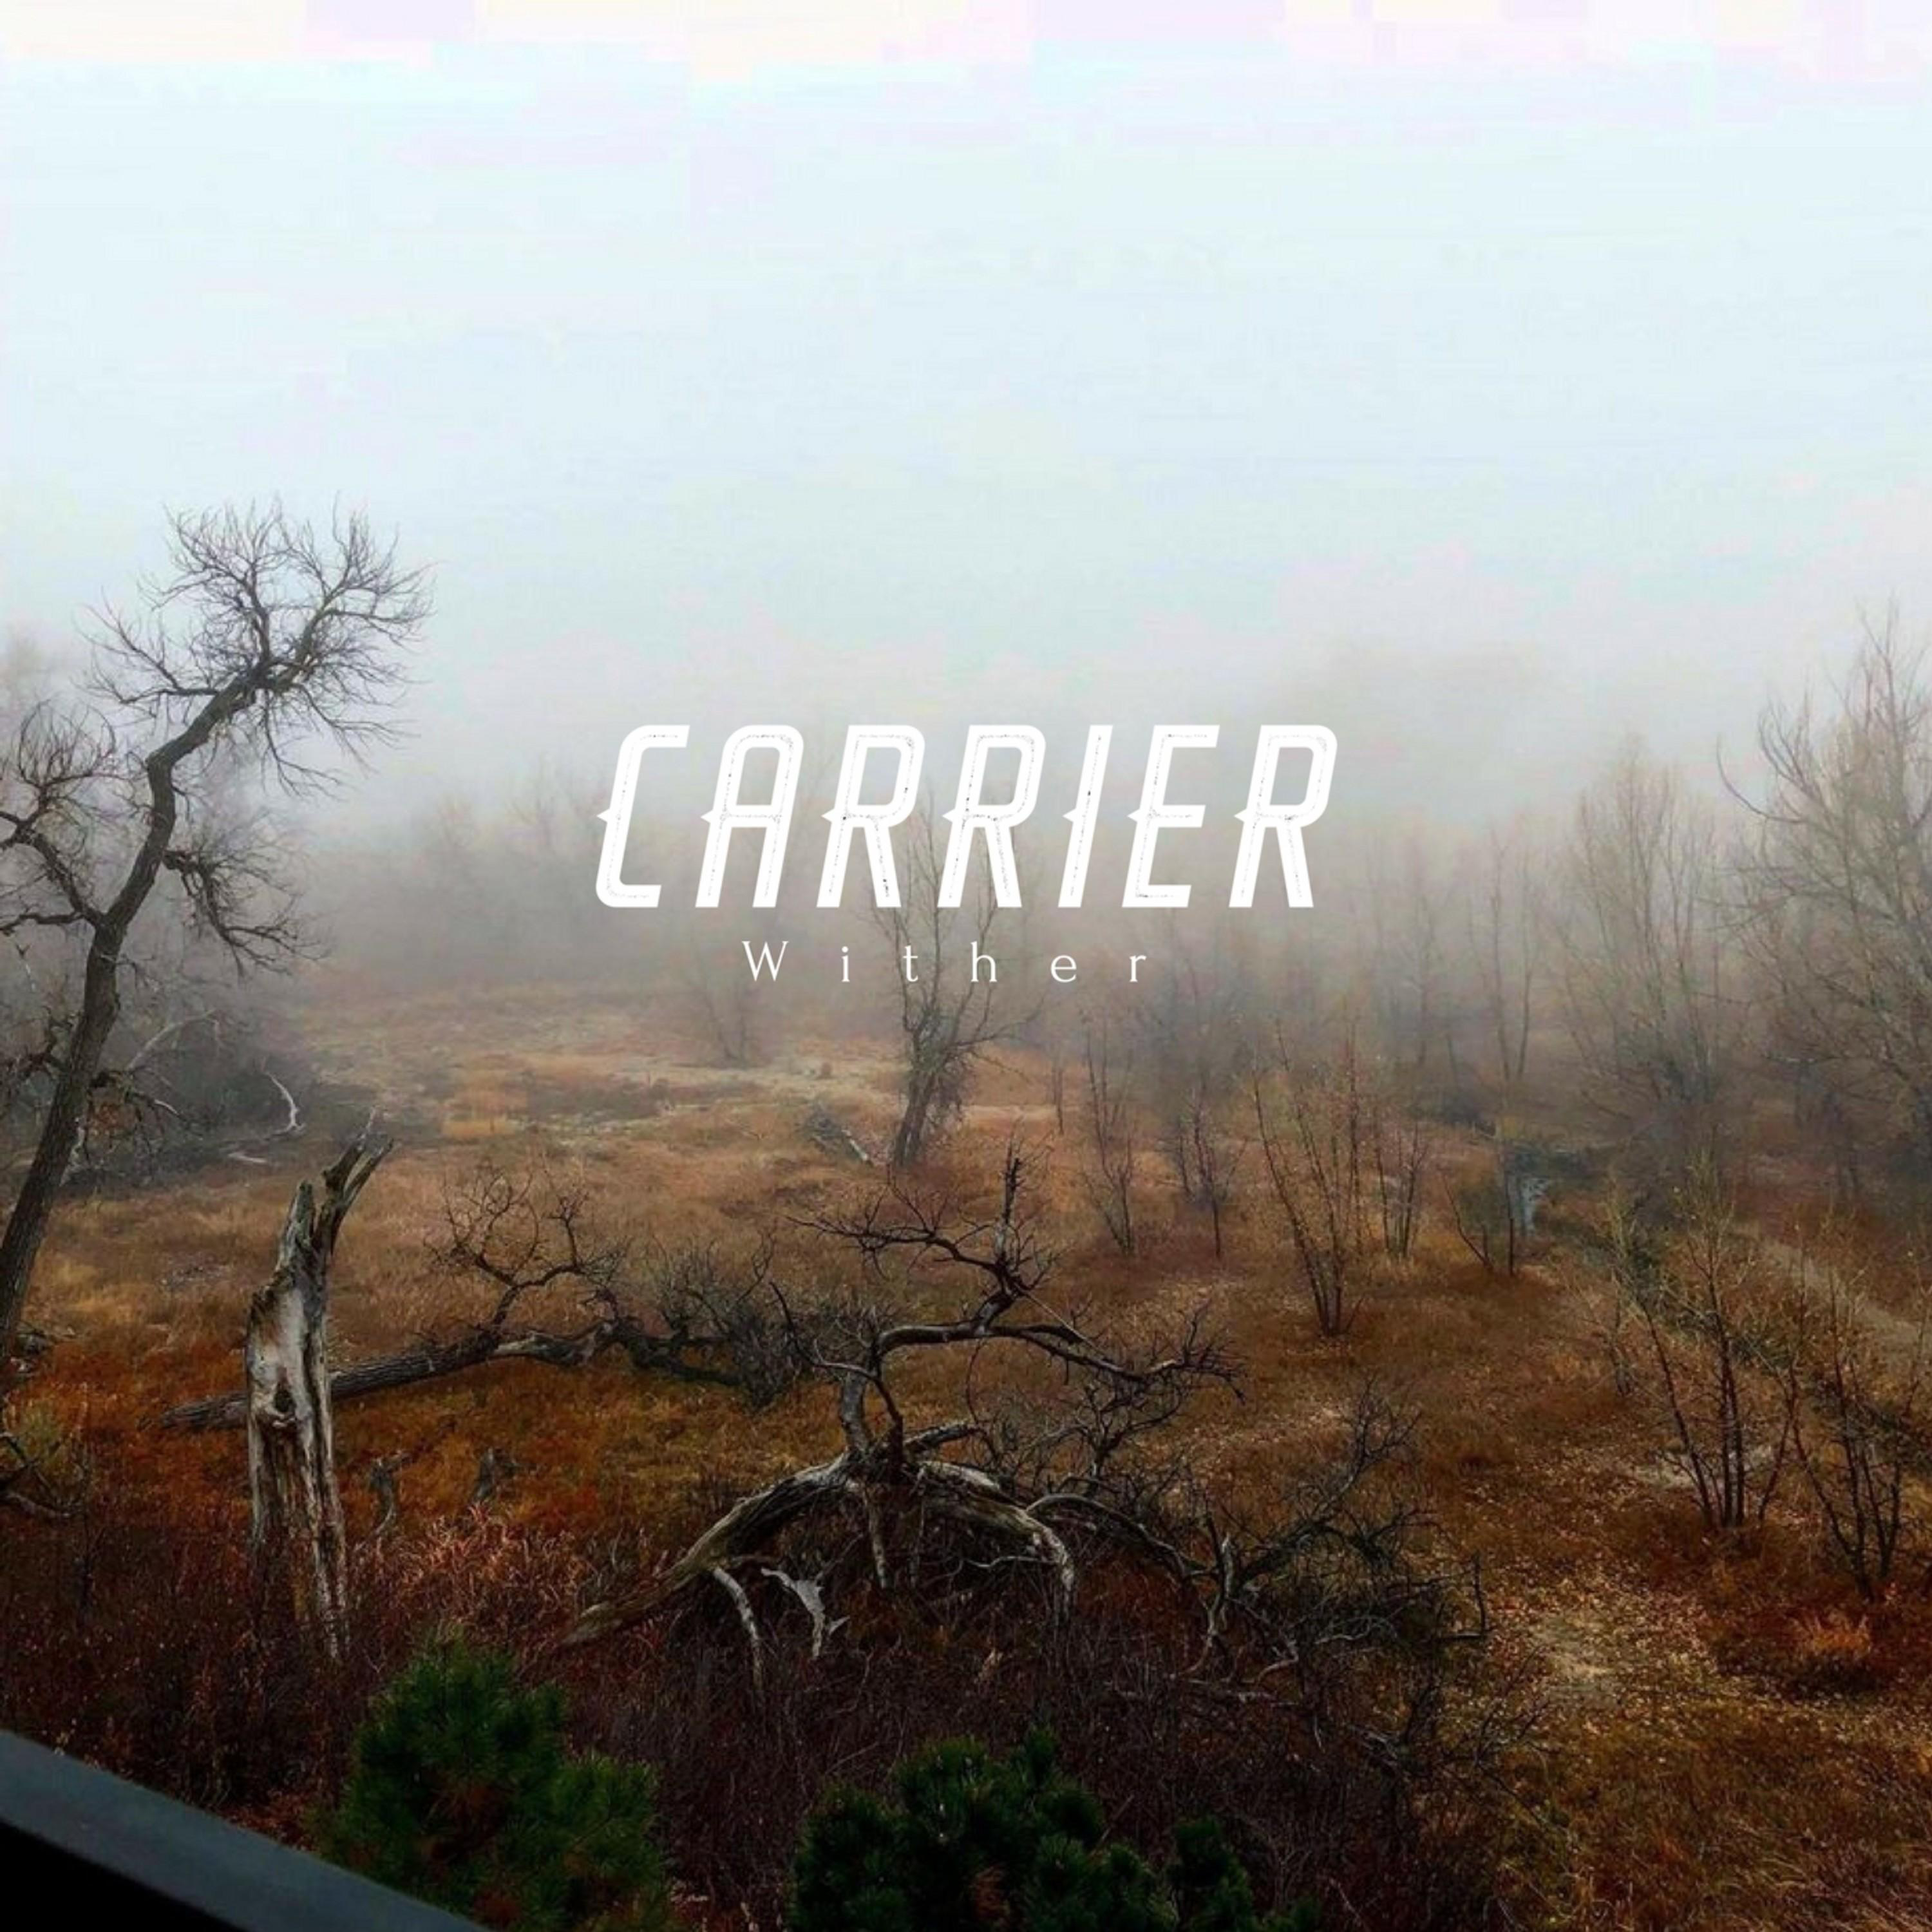 Carrier - Wither [EP] (2018) HCq1MqK6_o